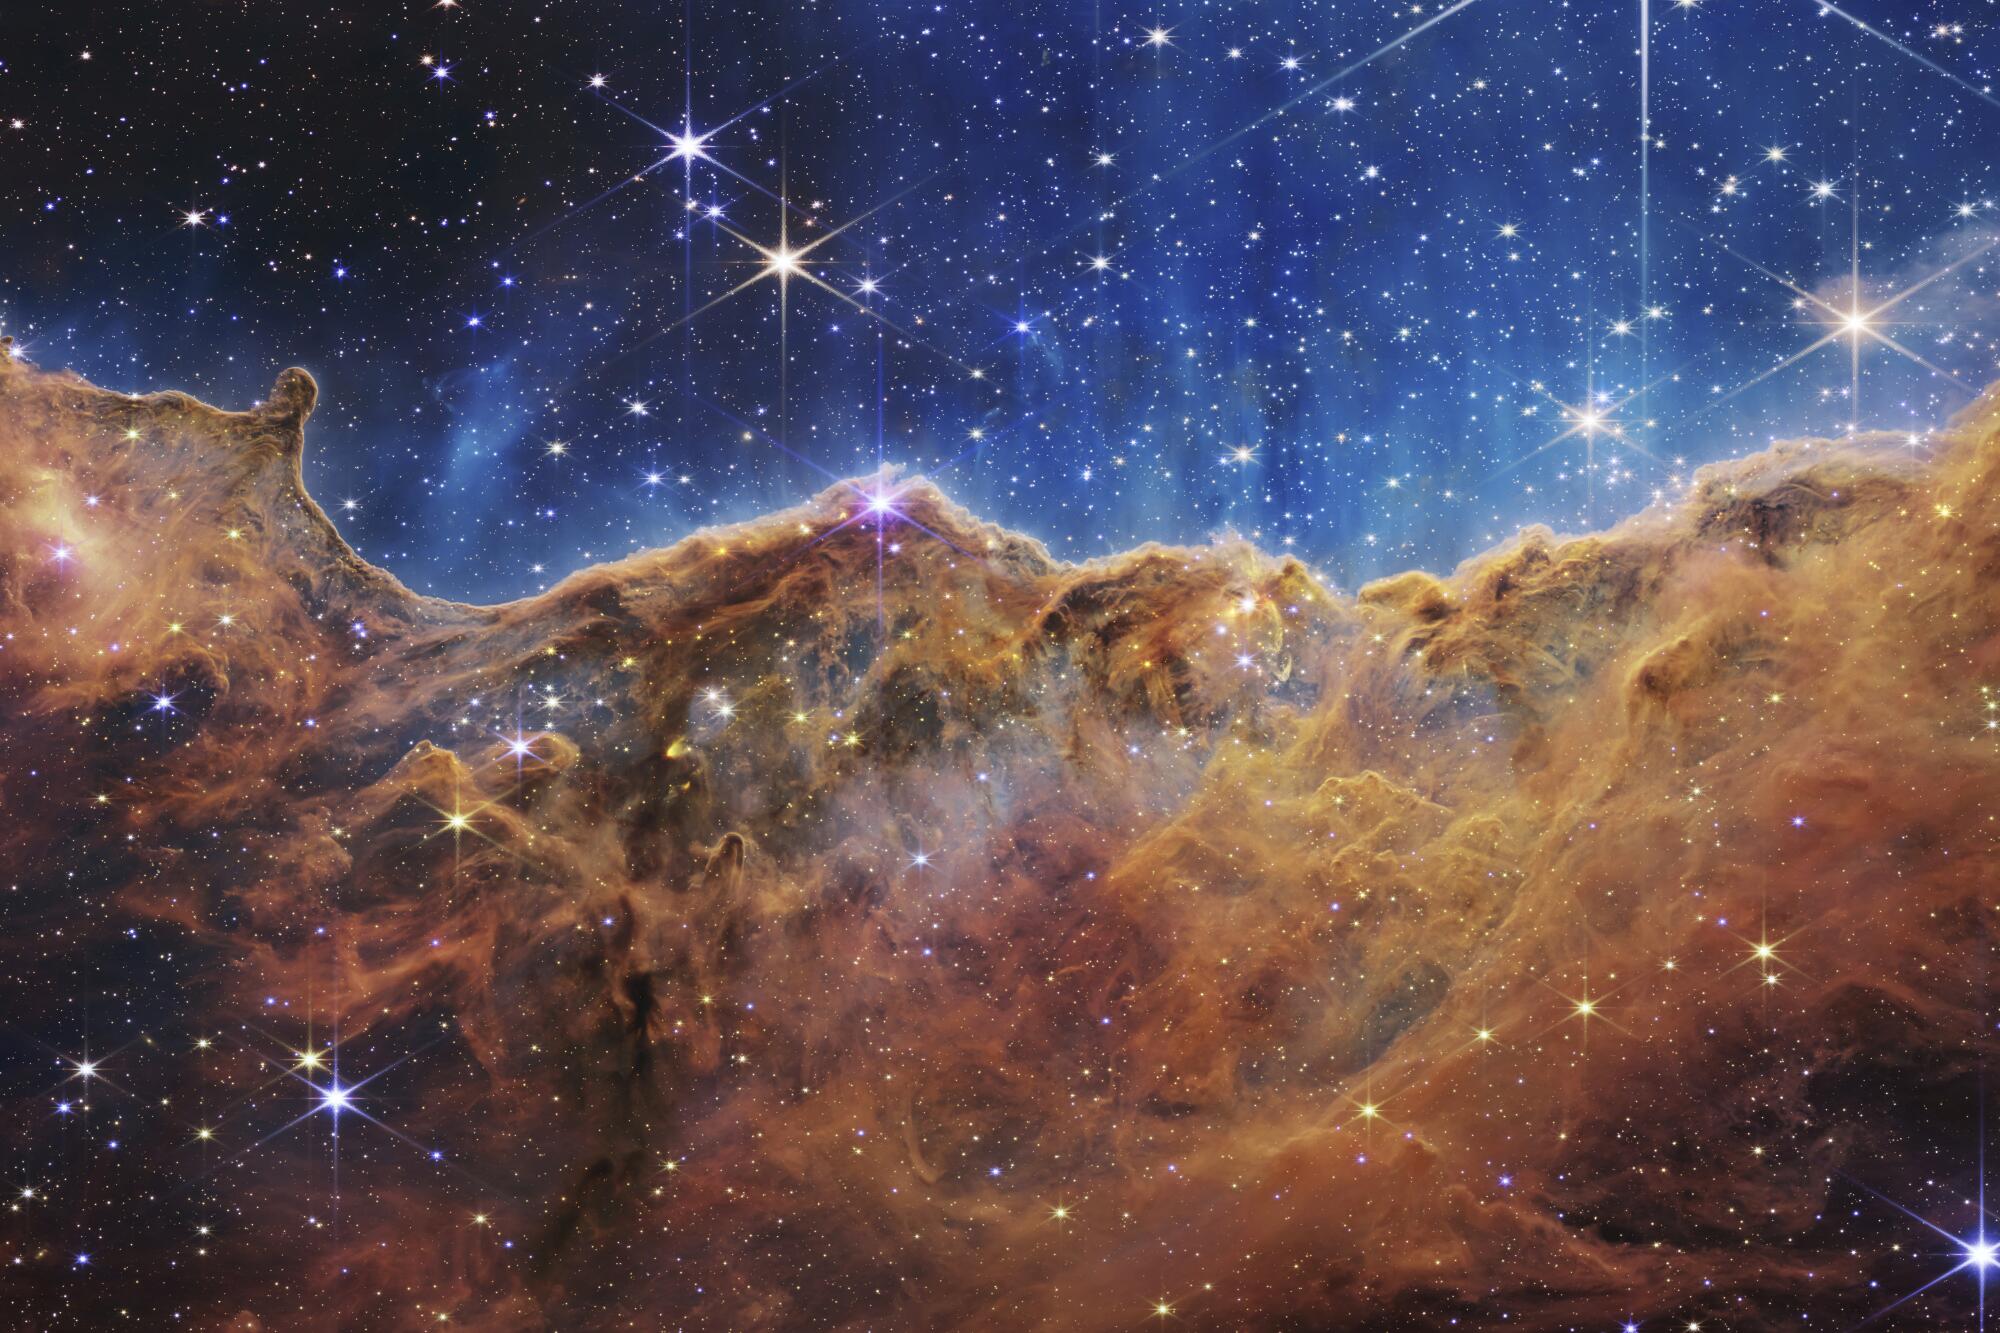 This image released by NASA shows the edge of a nearby, young, star-forming region NGC 3324 in the Carina Nebula. 